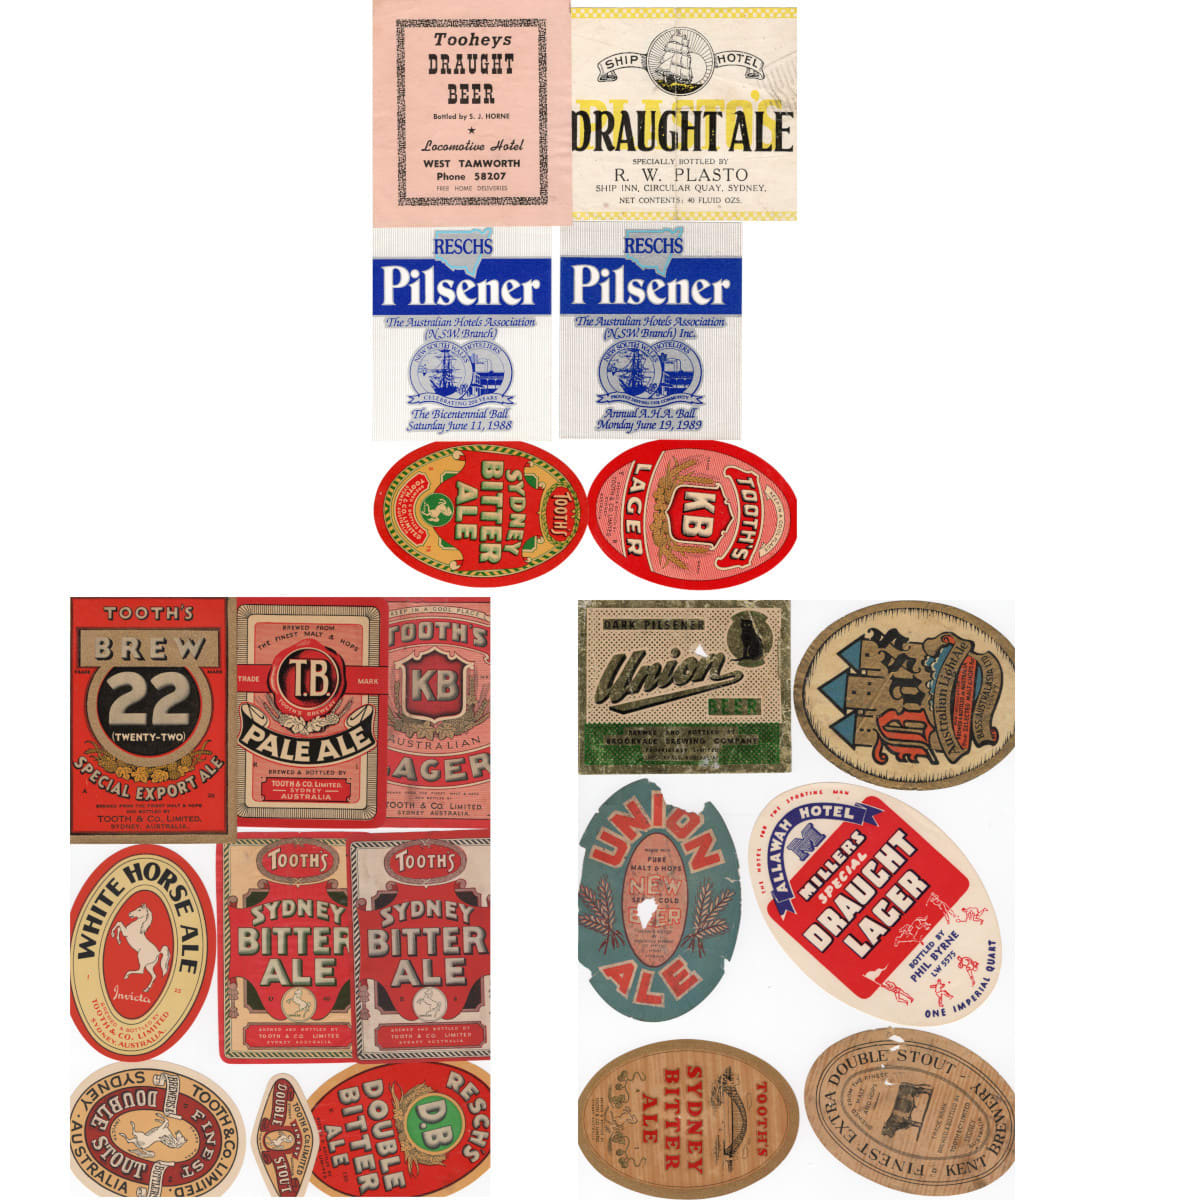 21 Beer Labels: Tooth & Co; Resch's; Brookvale Brewing; Hotel types. (New South Wales)